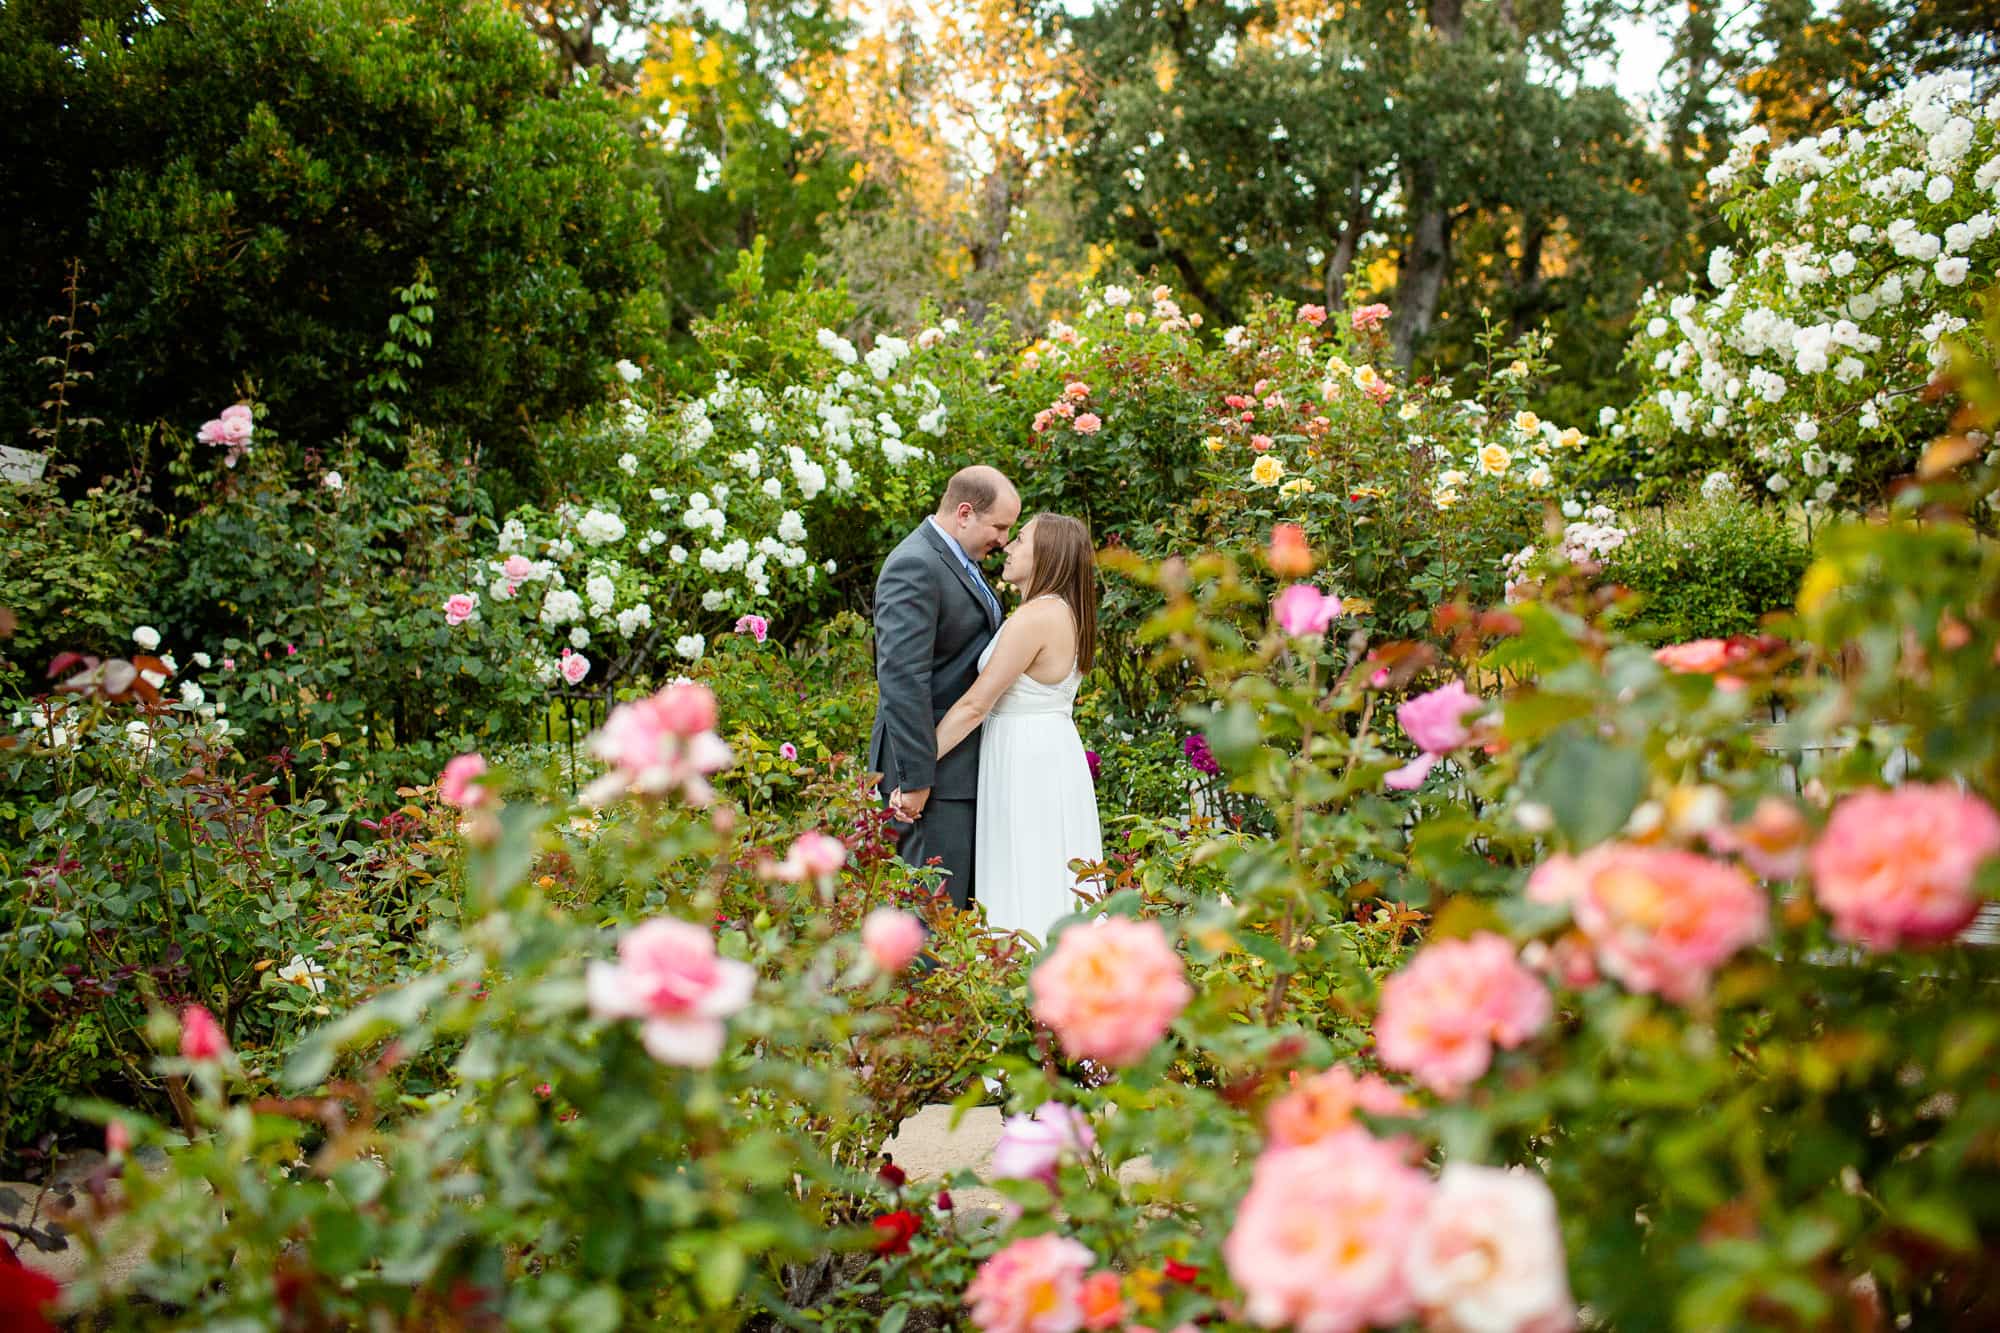 Groom and bride in the middle of a blooming rose garden in Marin